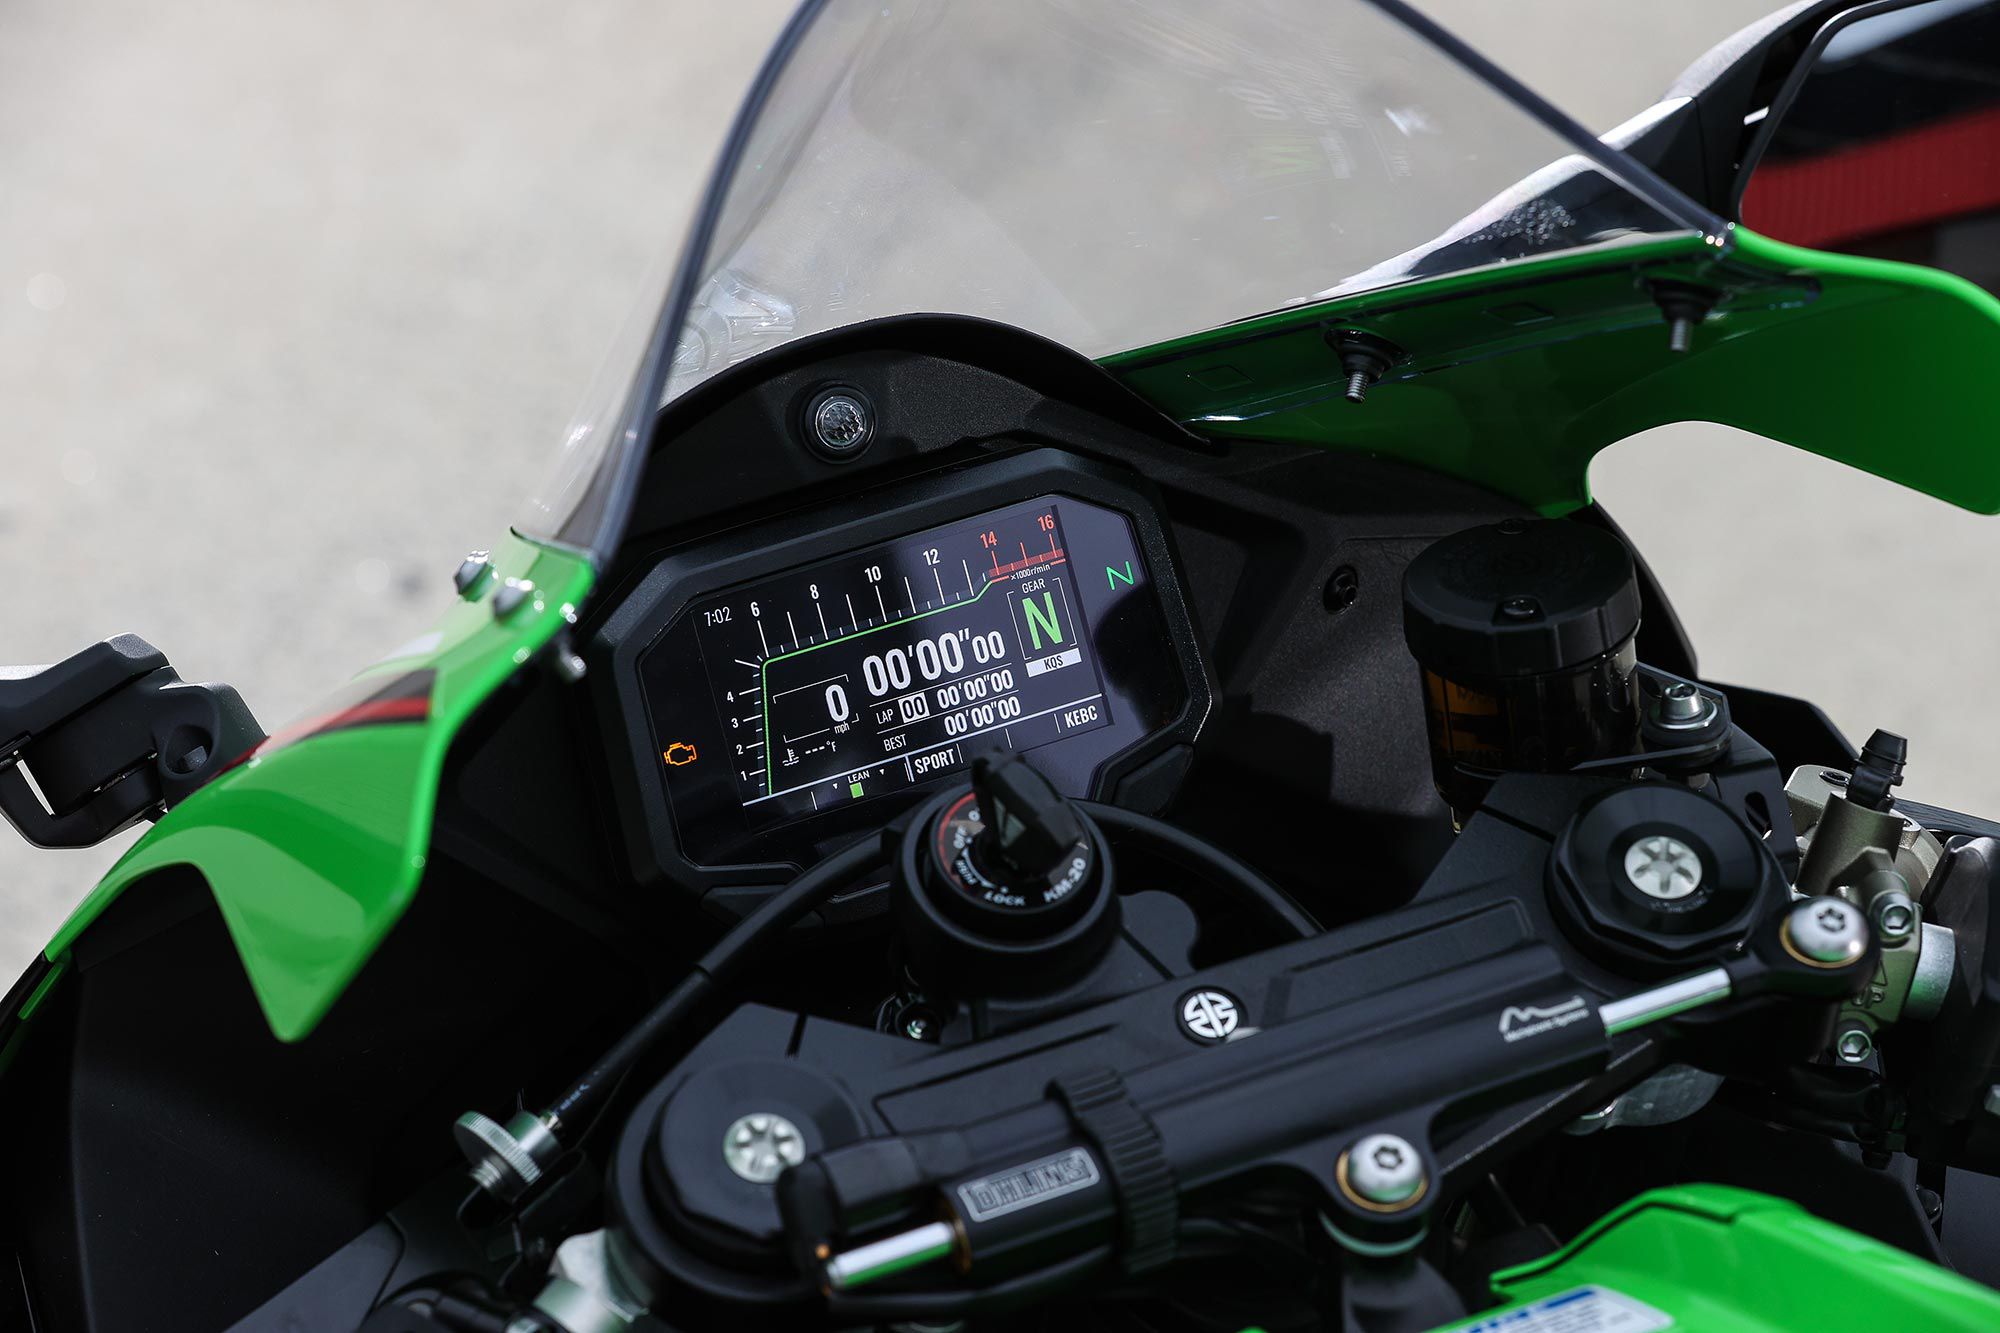 Kawasaki finally ditched the traditional LCD tachometer for a modern 4.3-inch TFT display.